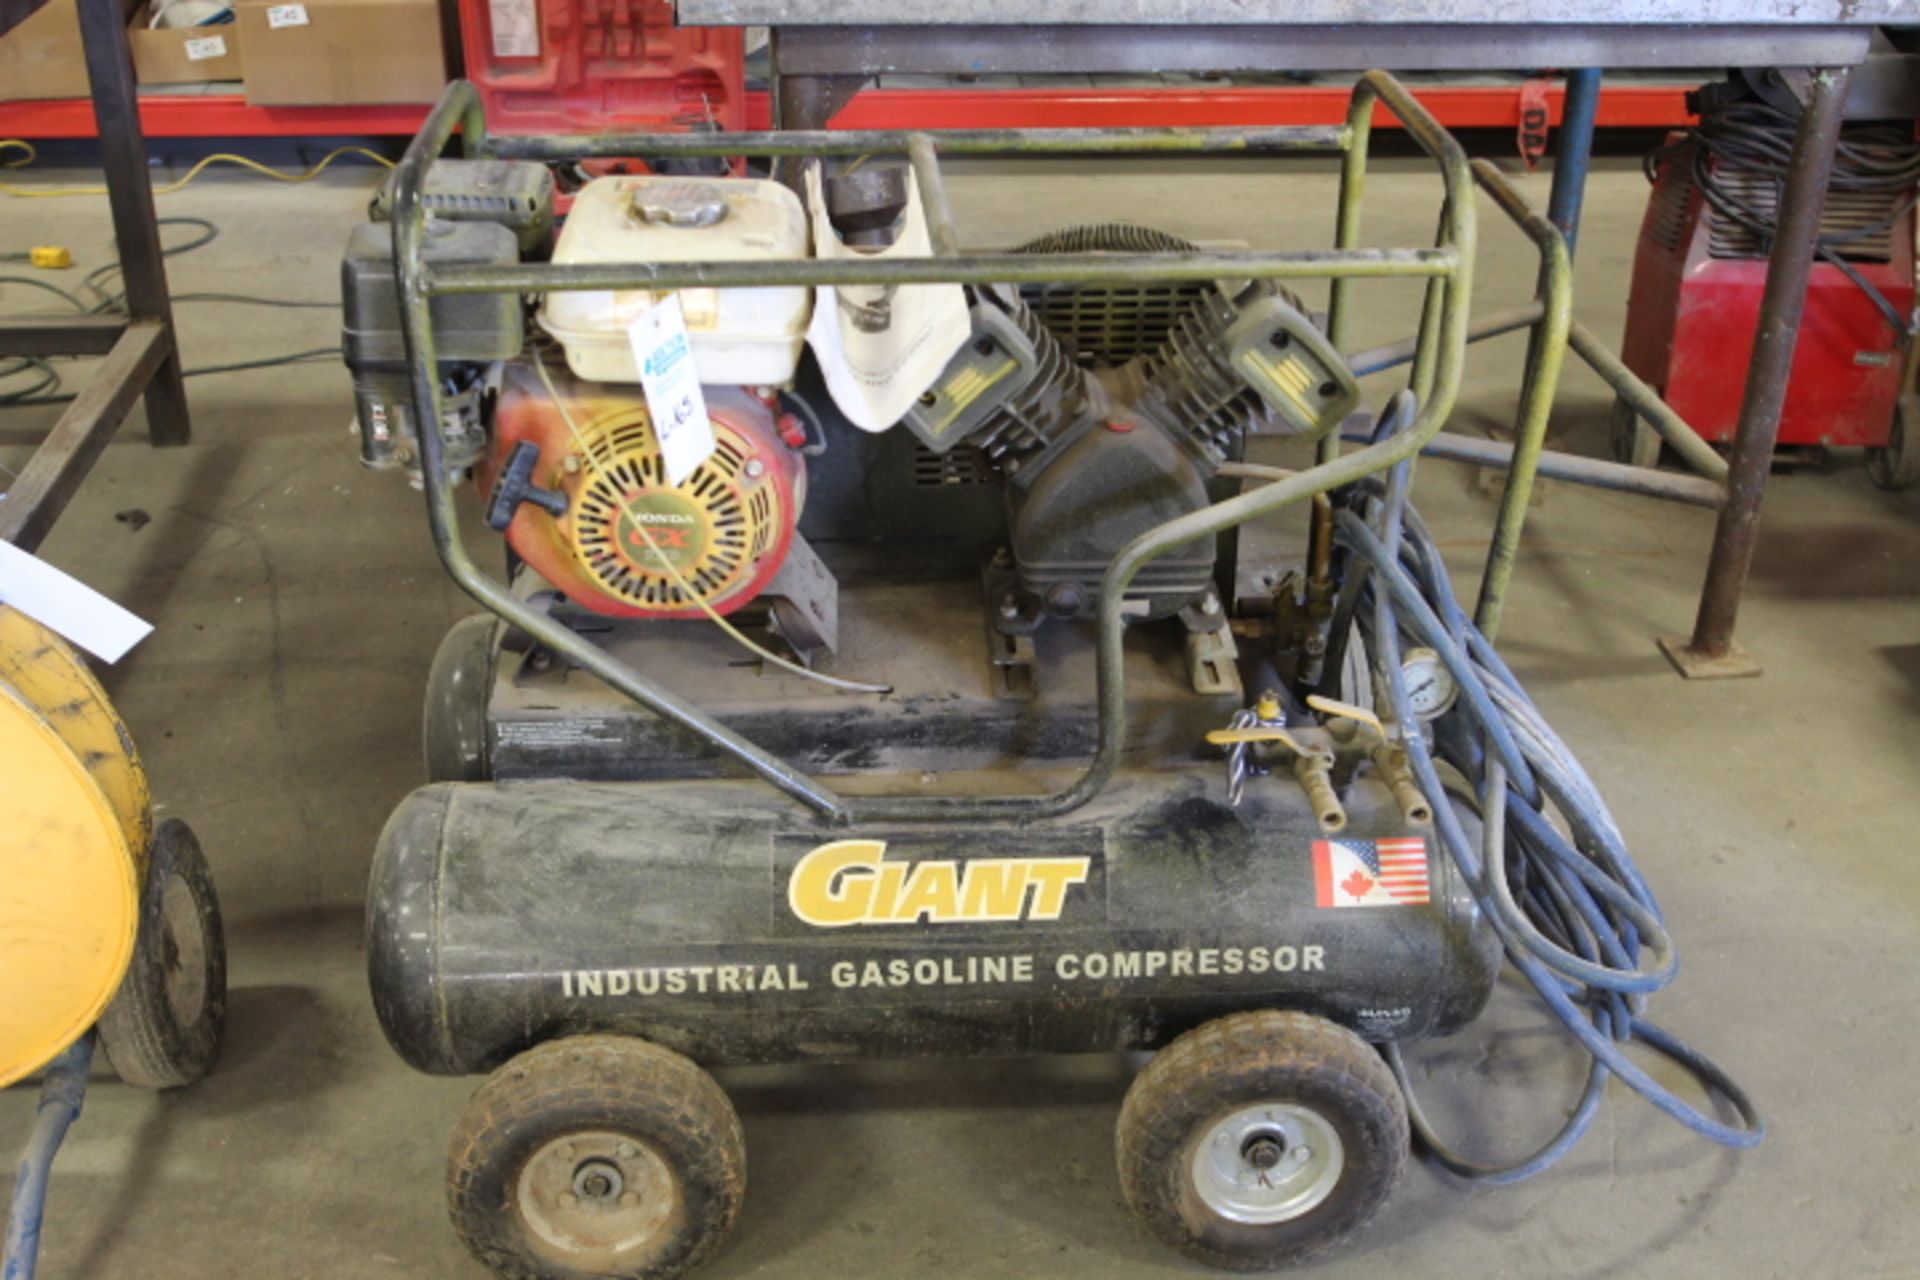 Giant Industrial Gasoline Air Compressor with hose